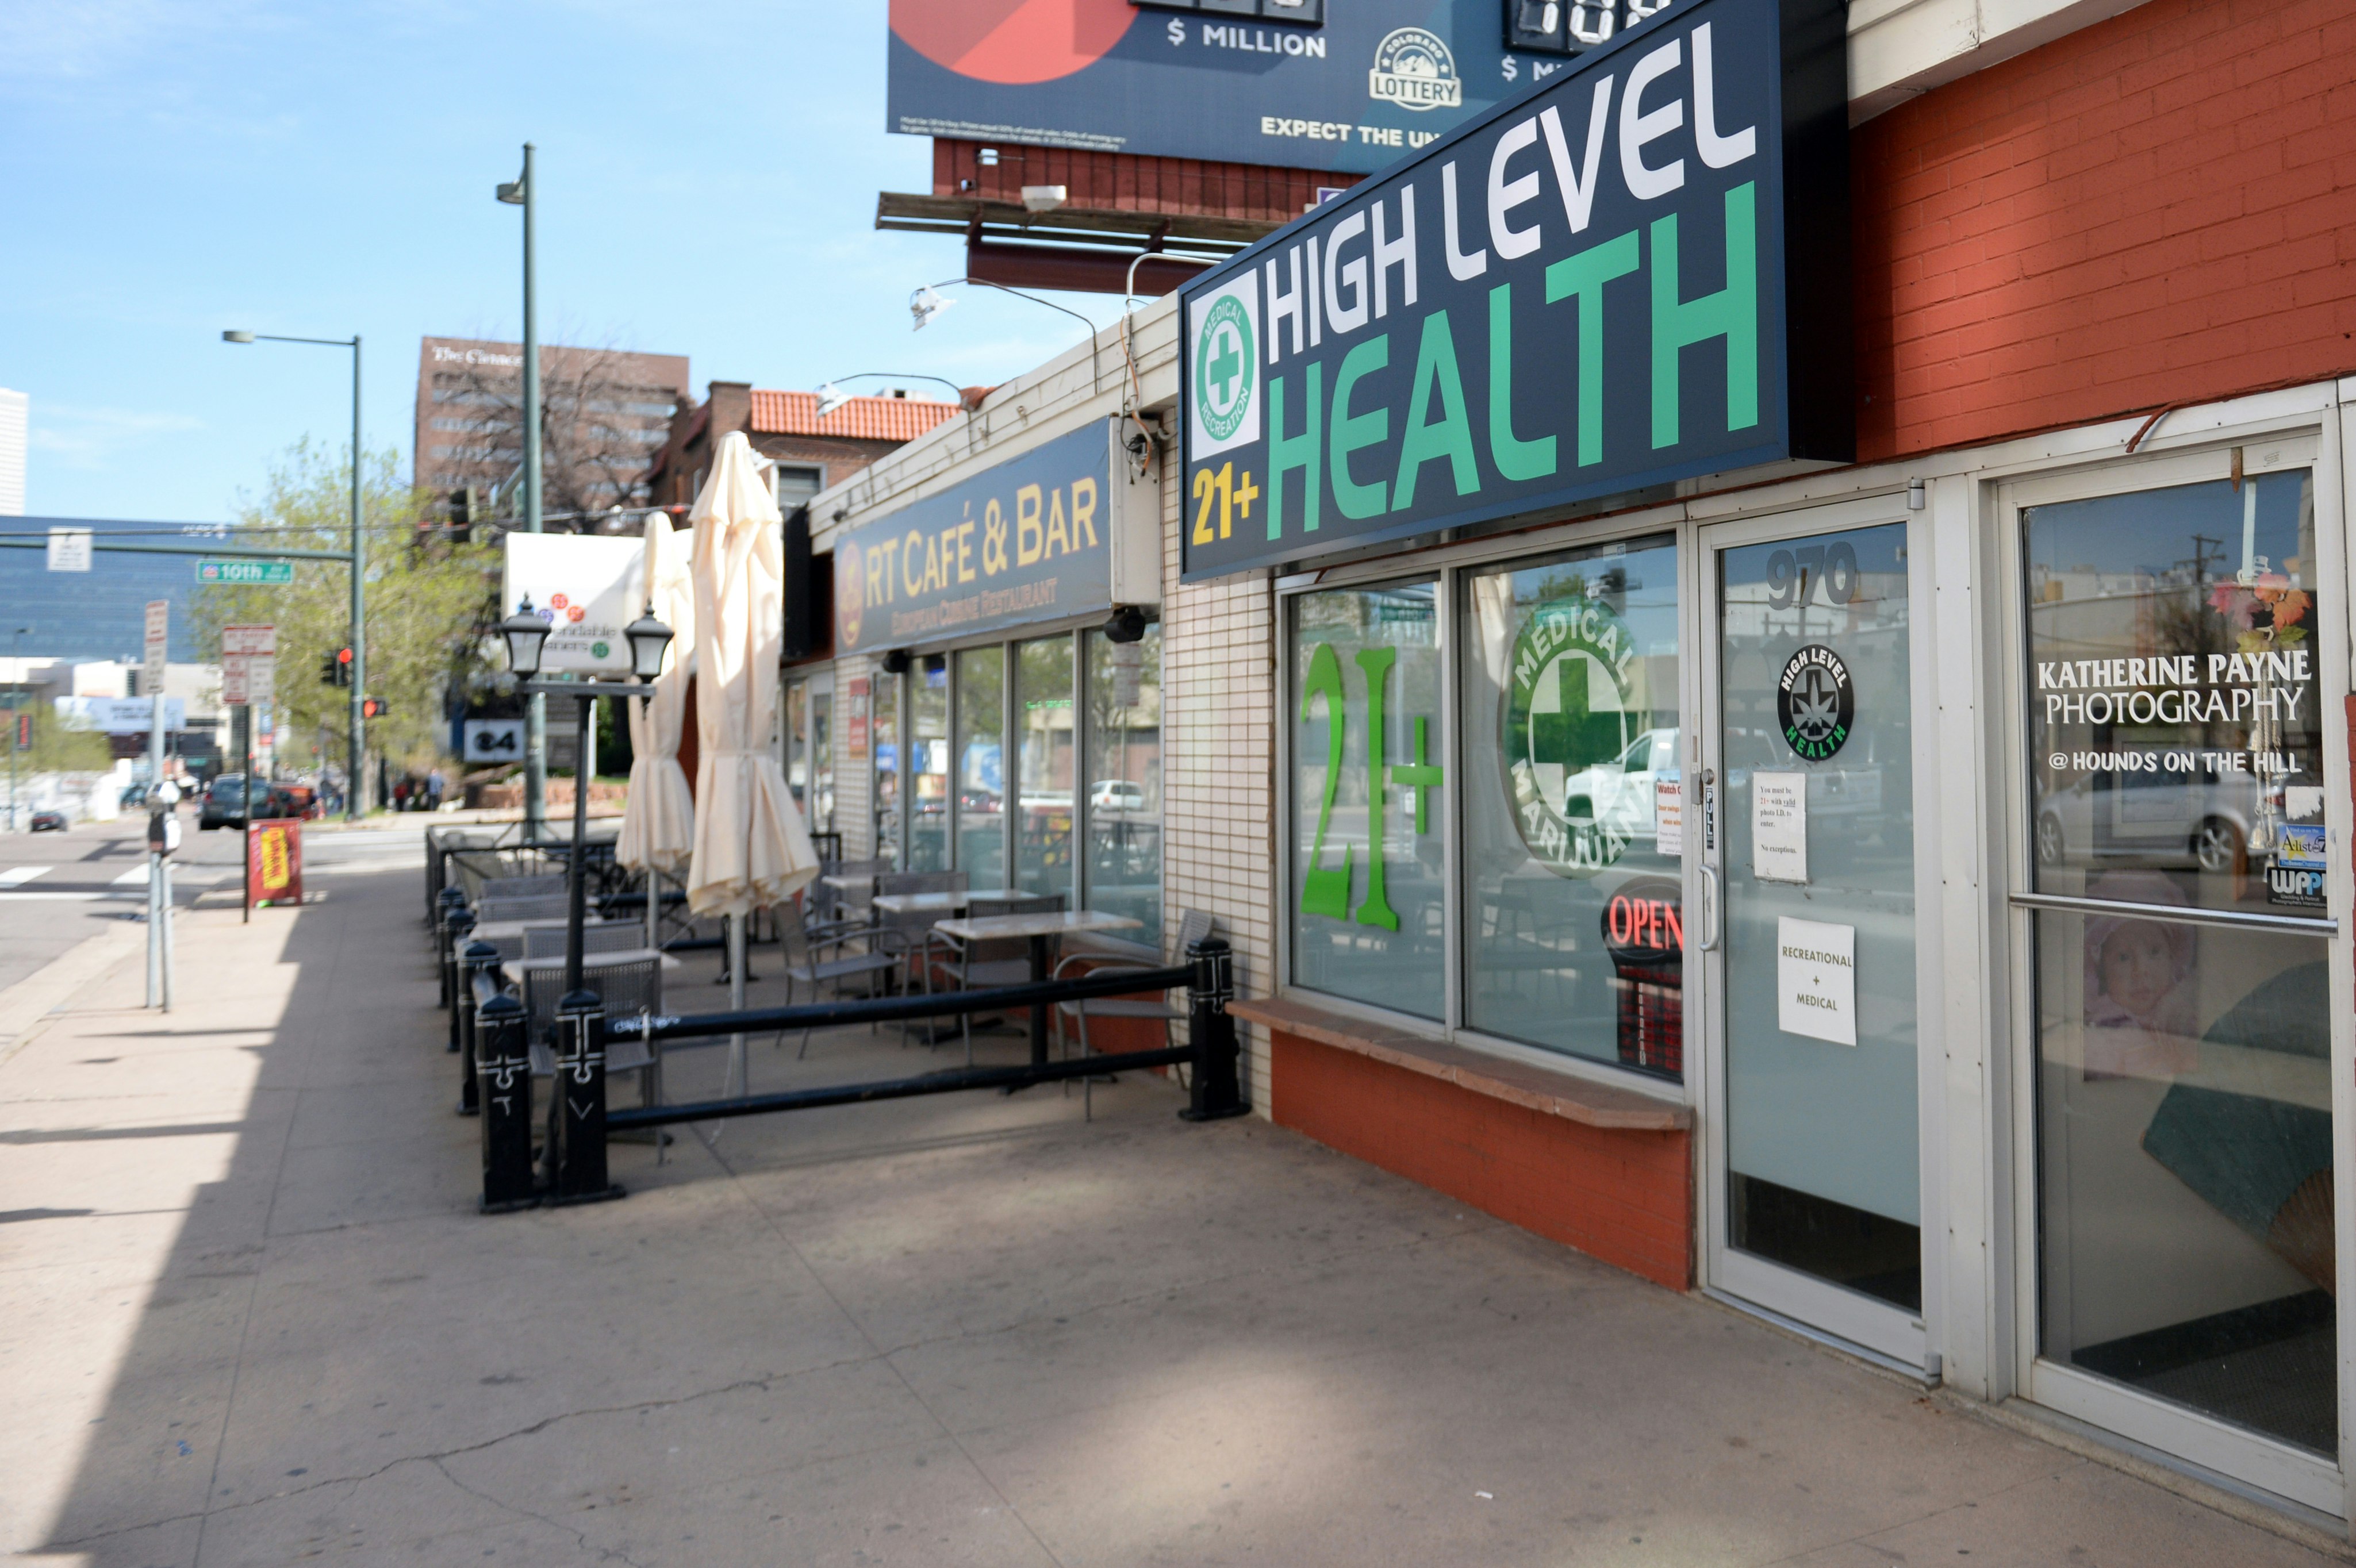 The exterior of High Level Health dispensary in Denver, Colorado has red brick around glass windows that are obscured by sheets of white paper. A large green sign reads 21+, while another shows the Medical Marijuana logo. Right next door is a cafe and bar with outdoor patio seating